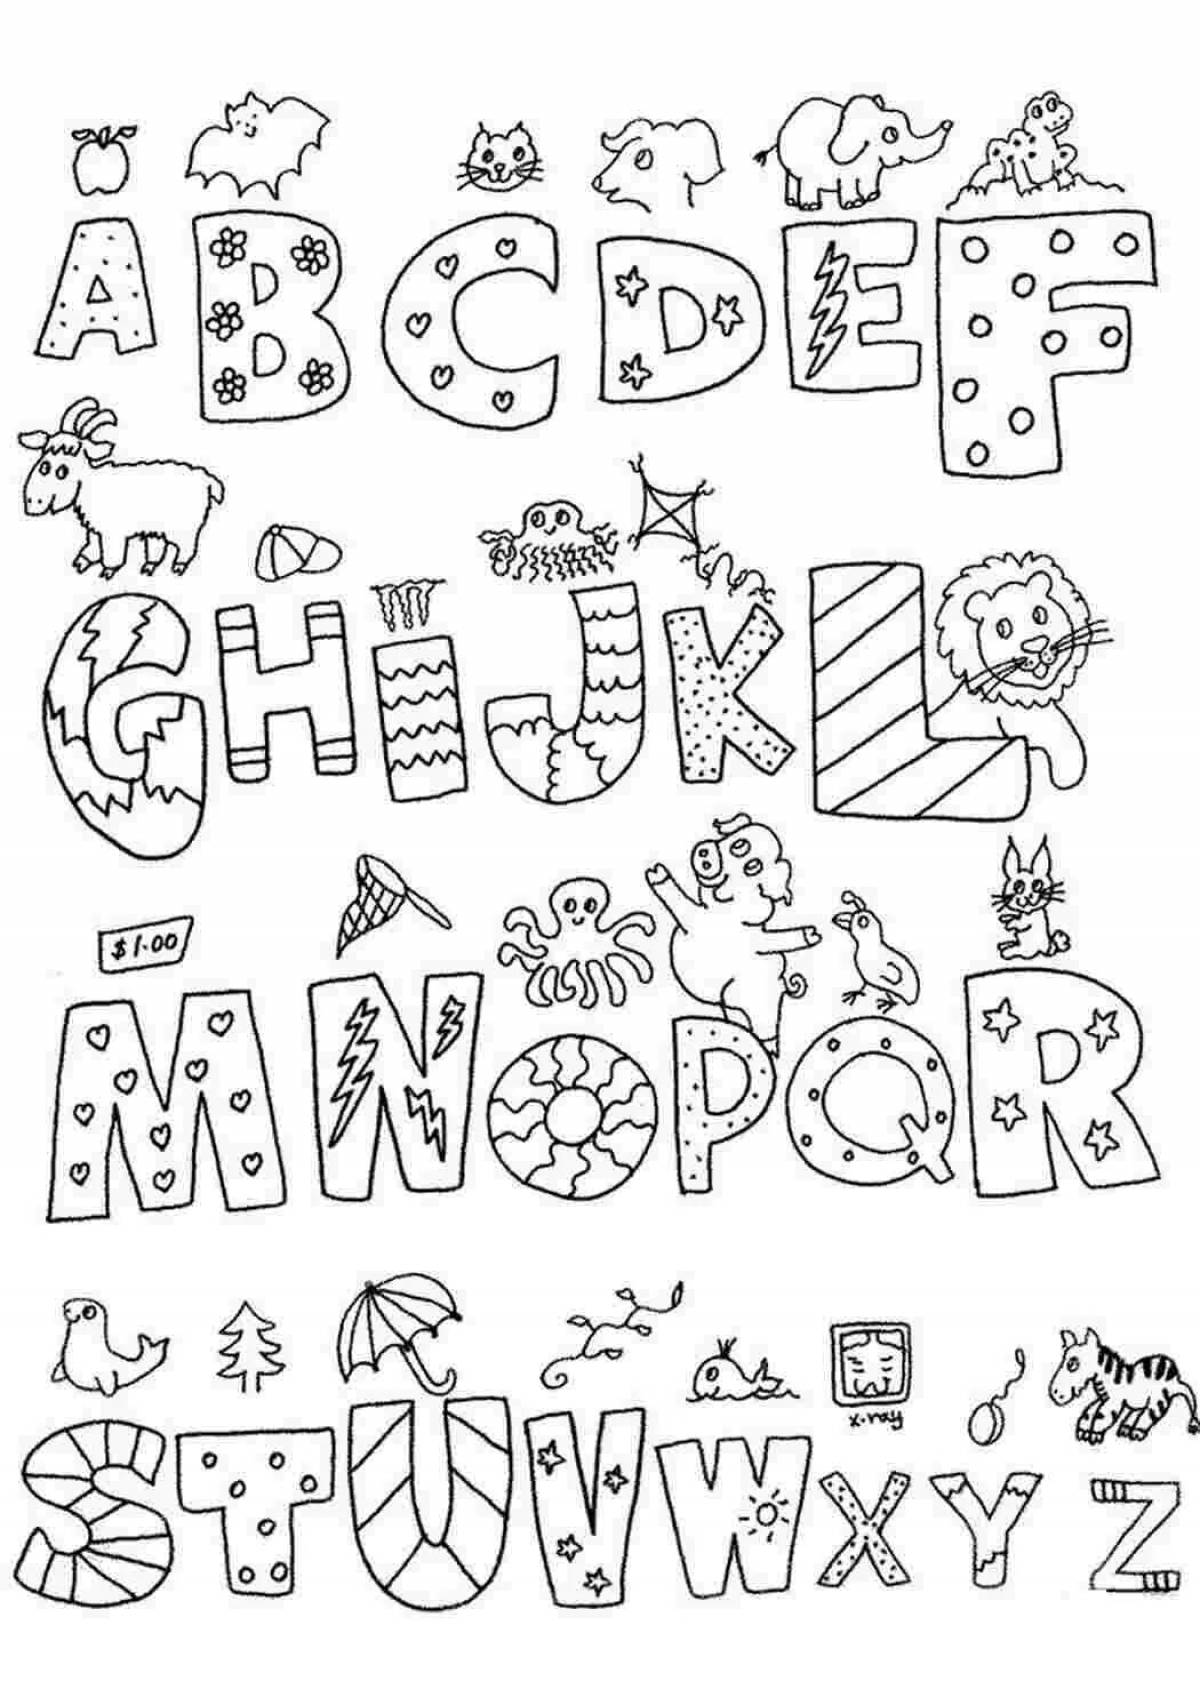 Colorful lore alphabet coloring page for kids to play with